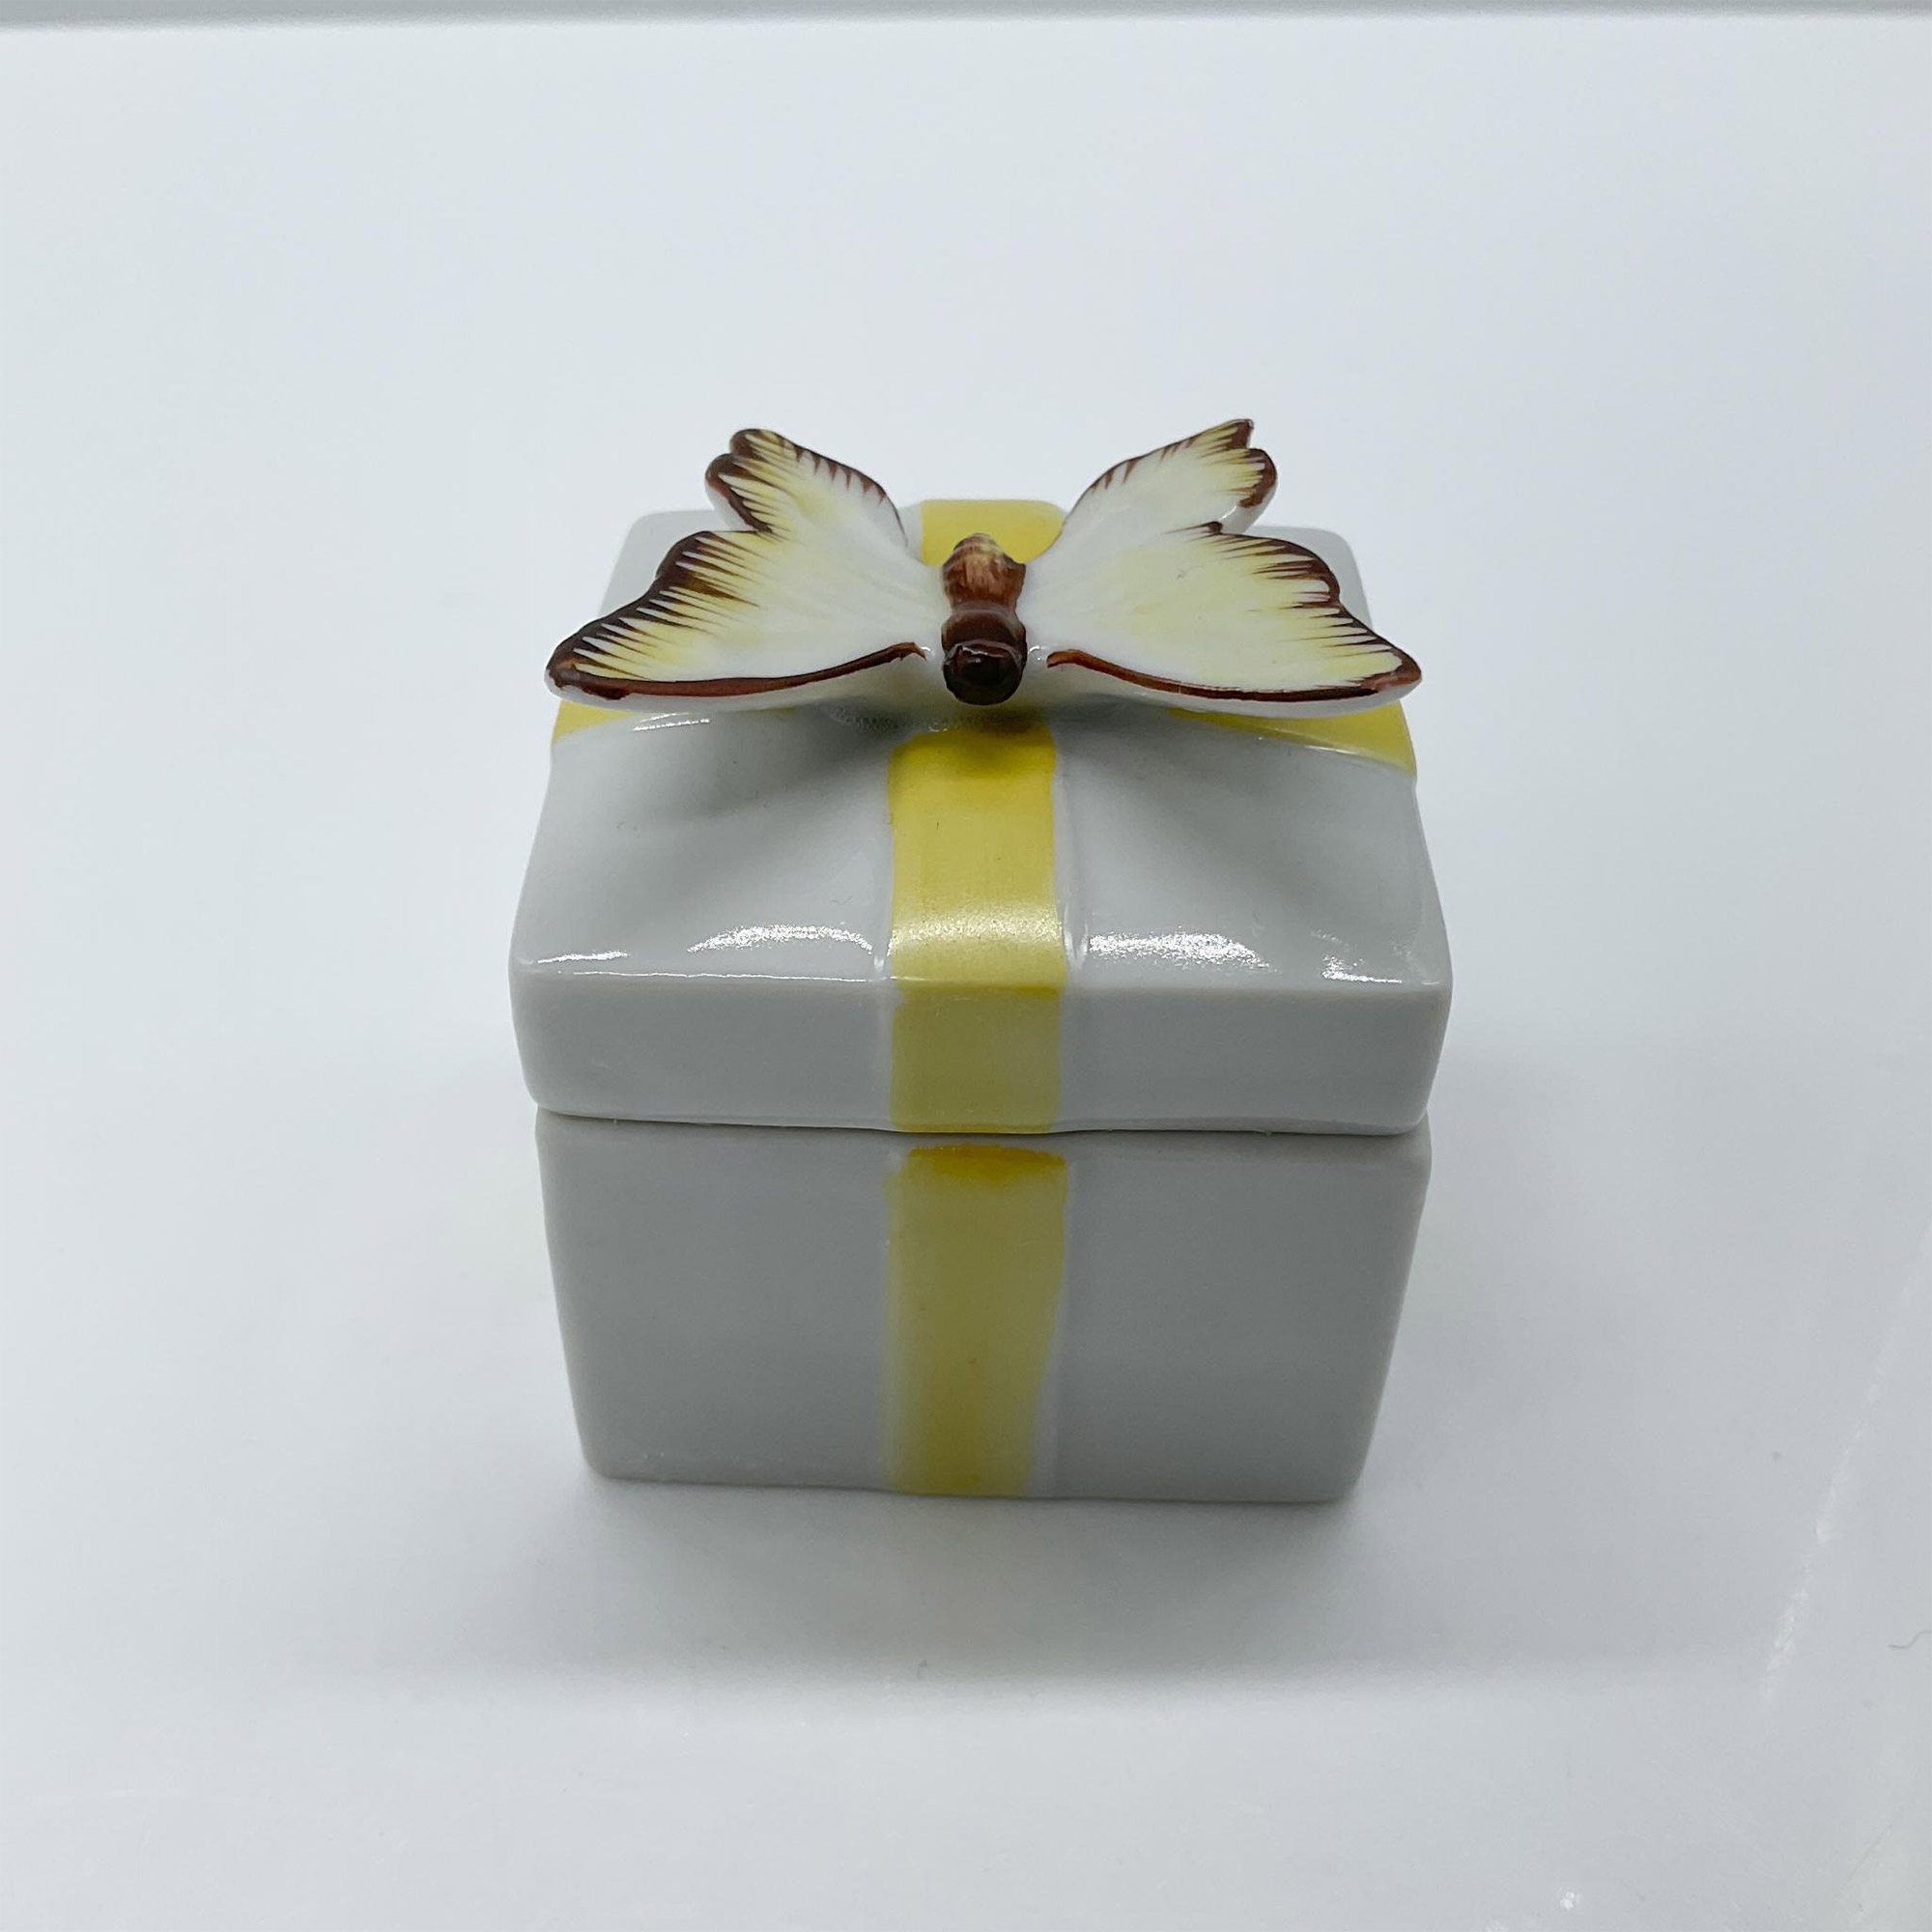 Shafford Lidded Treasure Box, Butterfly - Image 2 of 3